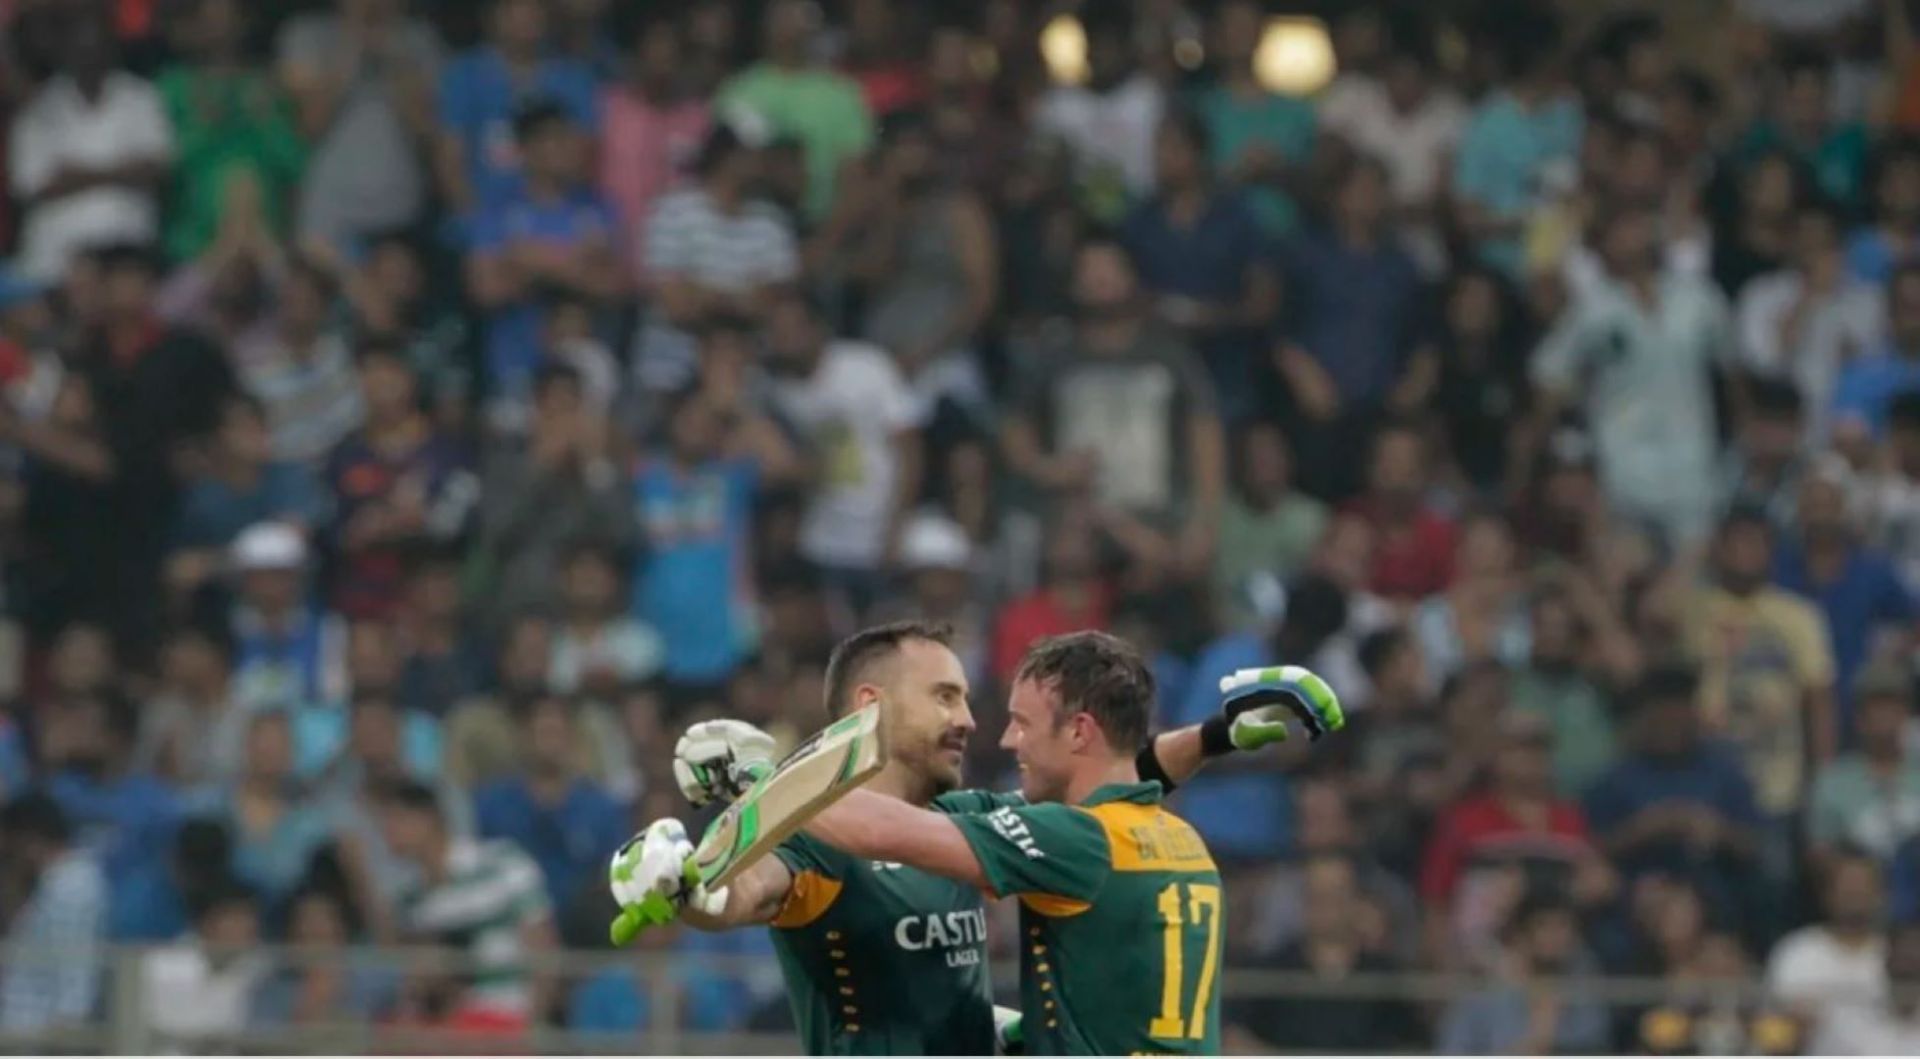 South Africa stunned India with a record batting performance to win the 2015 ODI series.